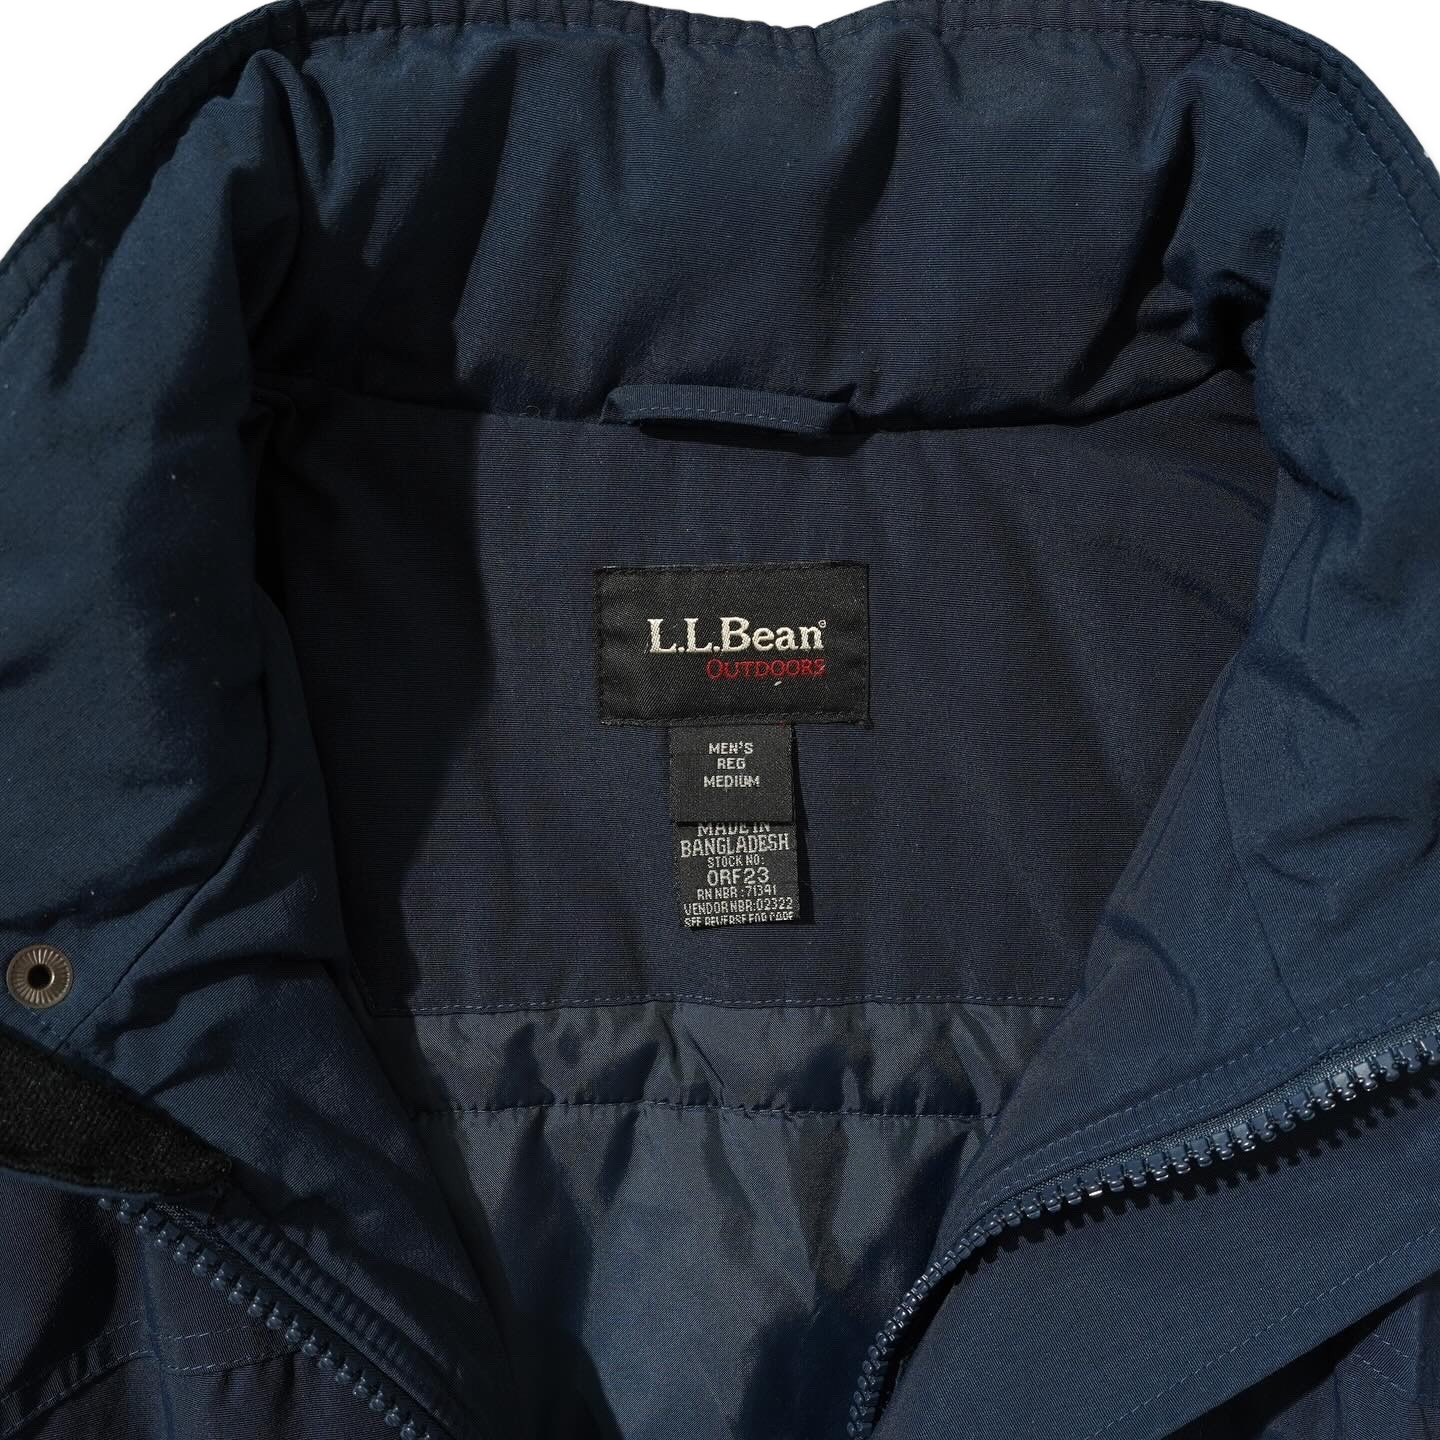 L.L.Bean OUTDOORS Thinsulate Ultra Jacket